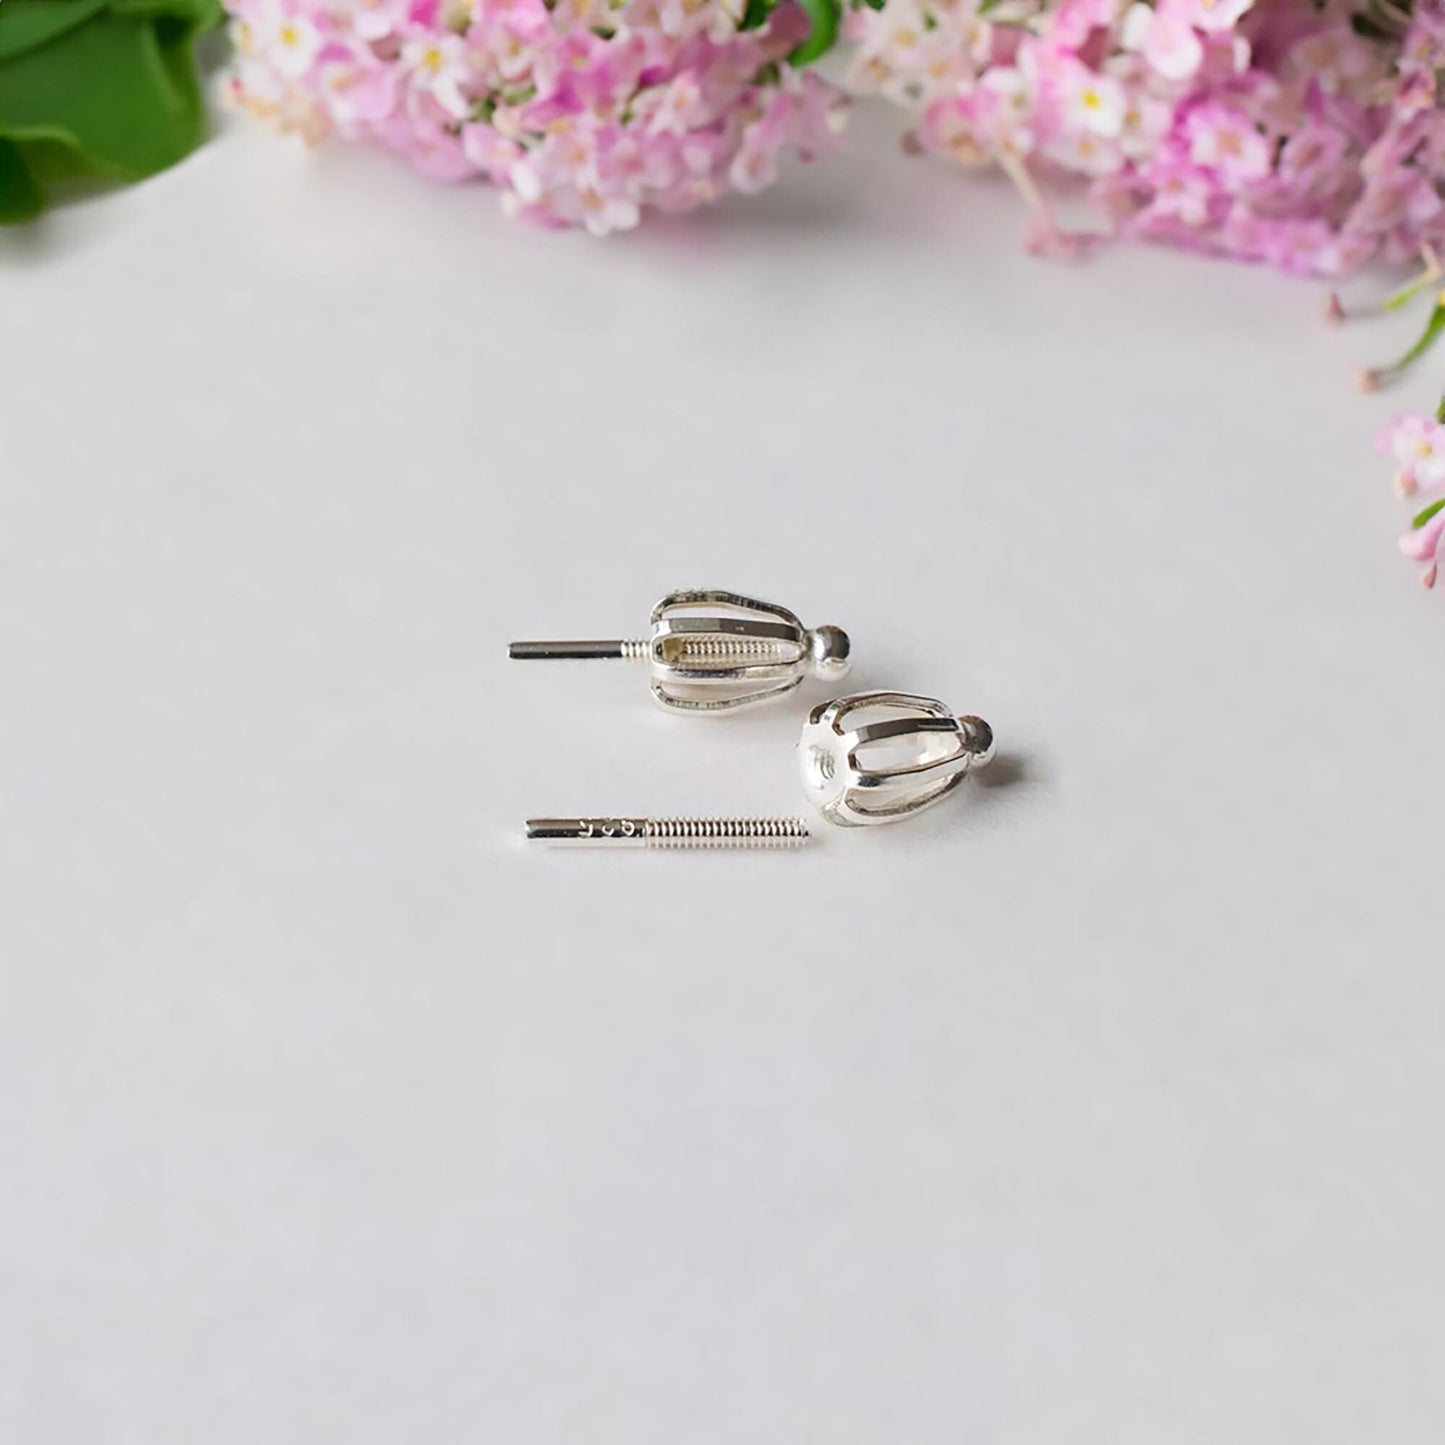 Screw Back Earring Backs 925 Sterling Silver: Keep Your Favorite Earrings Safe and Secure